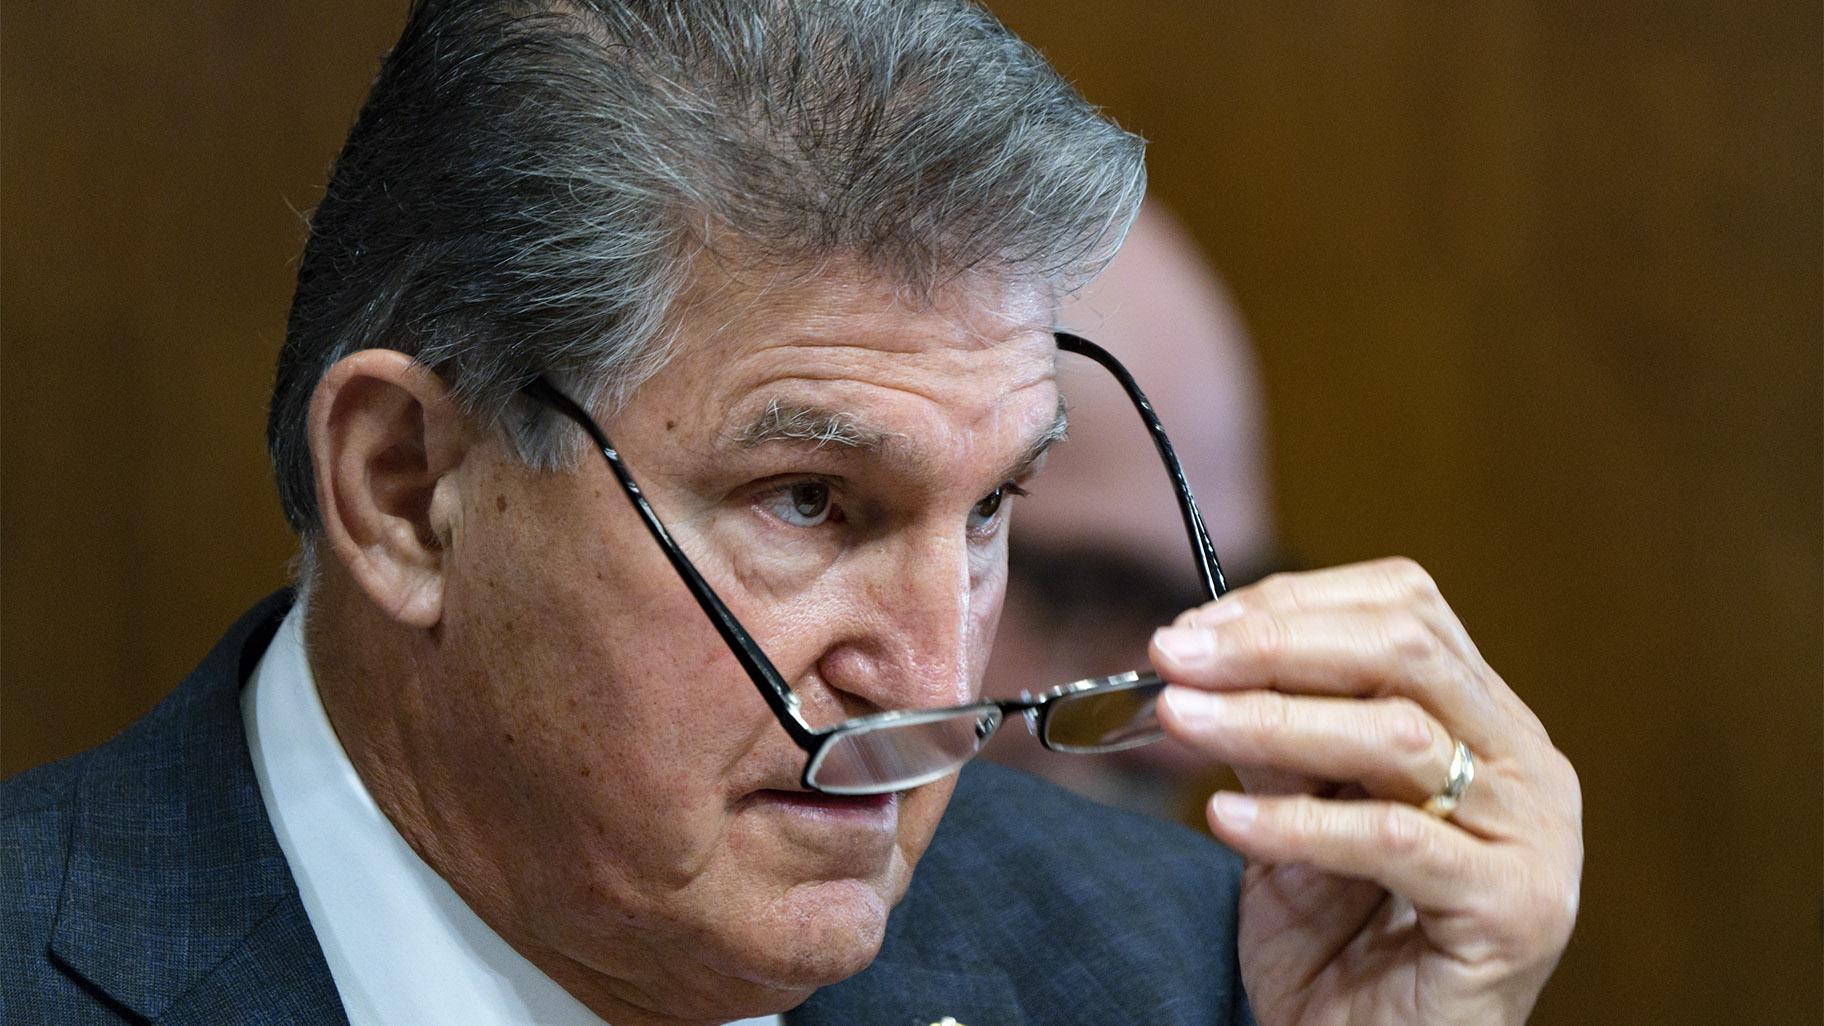 Sen. Joe Manchin, D-W.Va., a key holdout vote on President Joe Biden's domestic agenda, chairs a hearing of the Senate Energy and Natural Resources Committee, at the Capitol in Washington, Tuesday, Oct. 19, 2021. (AP Photo / J. Scott Applewhite)